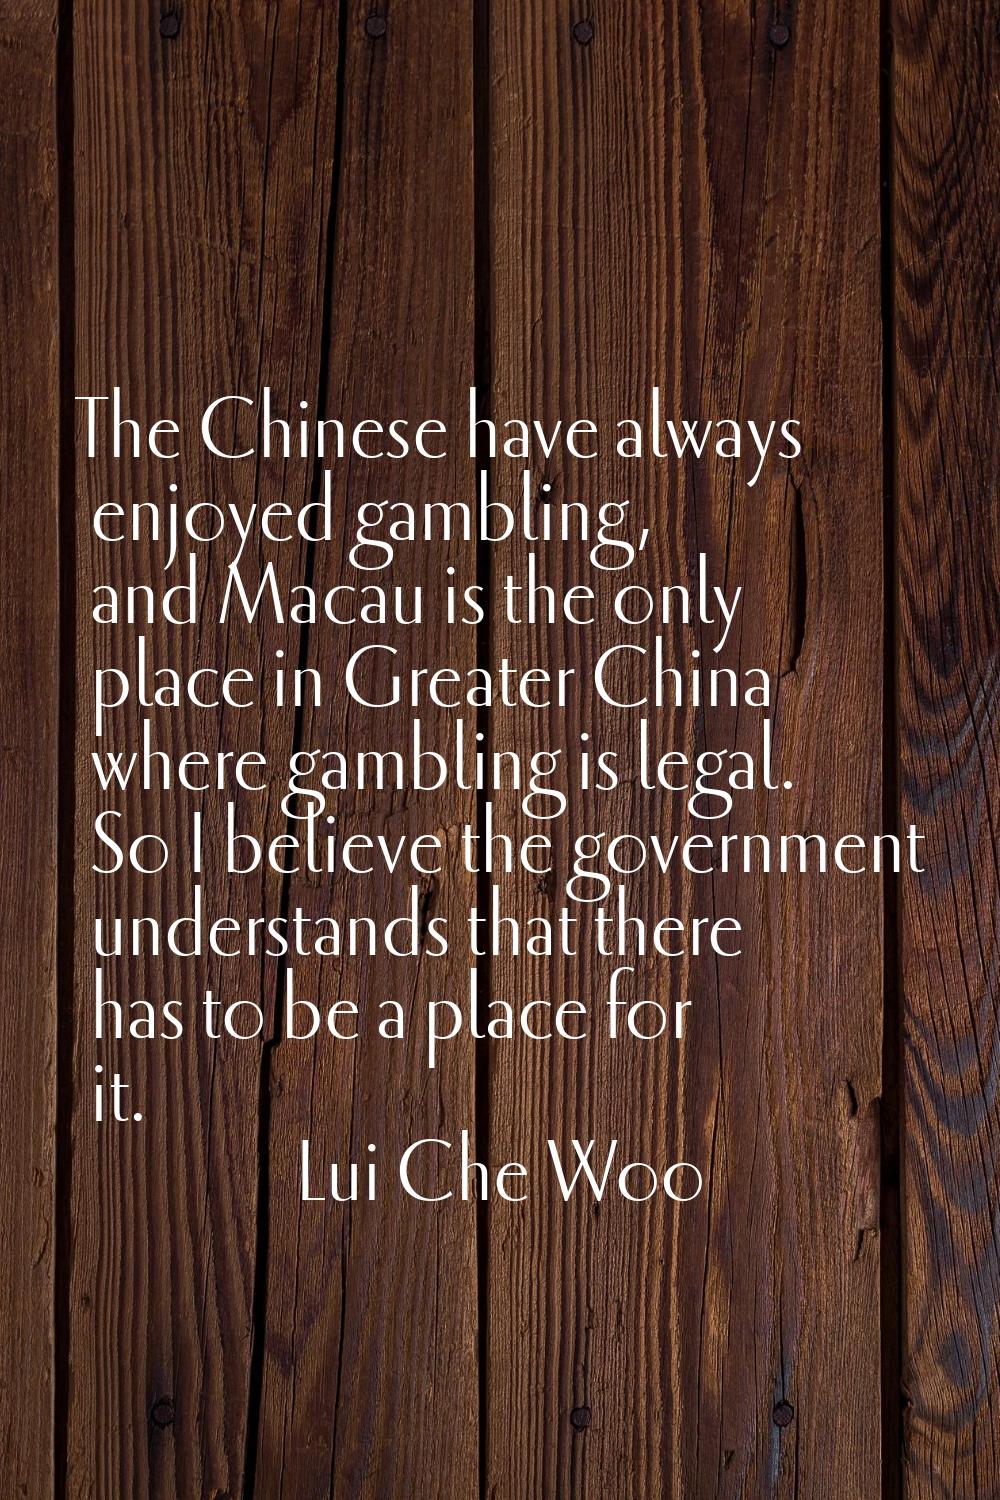 The Chinese have always enjoyed gambling, and Macau is the only place in Greater China where gambli